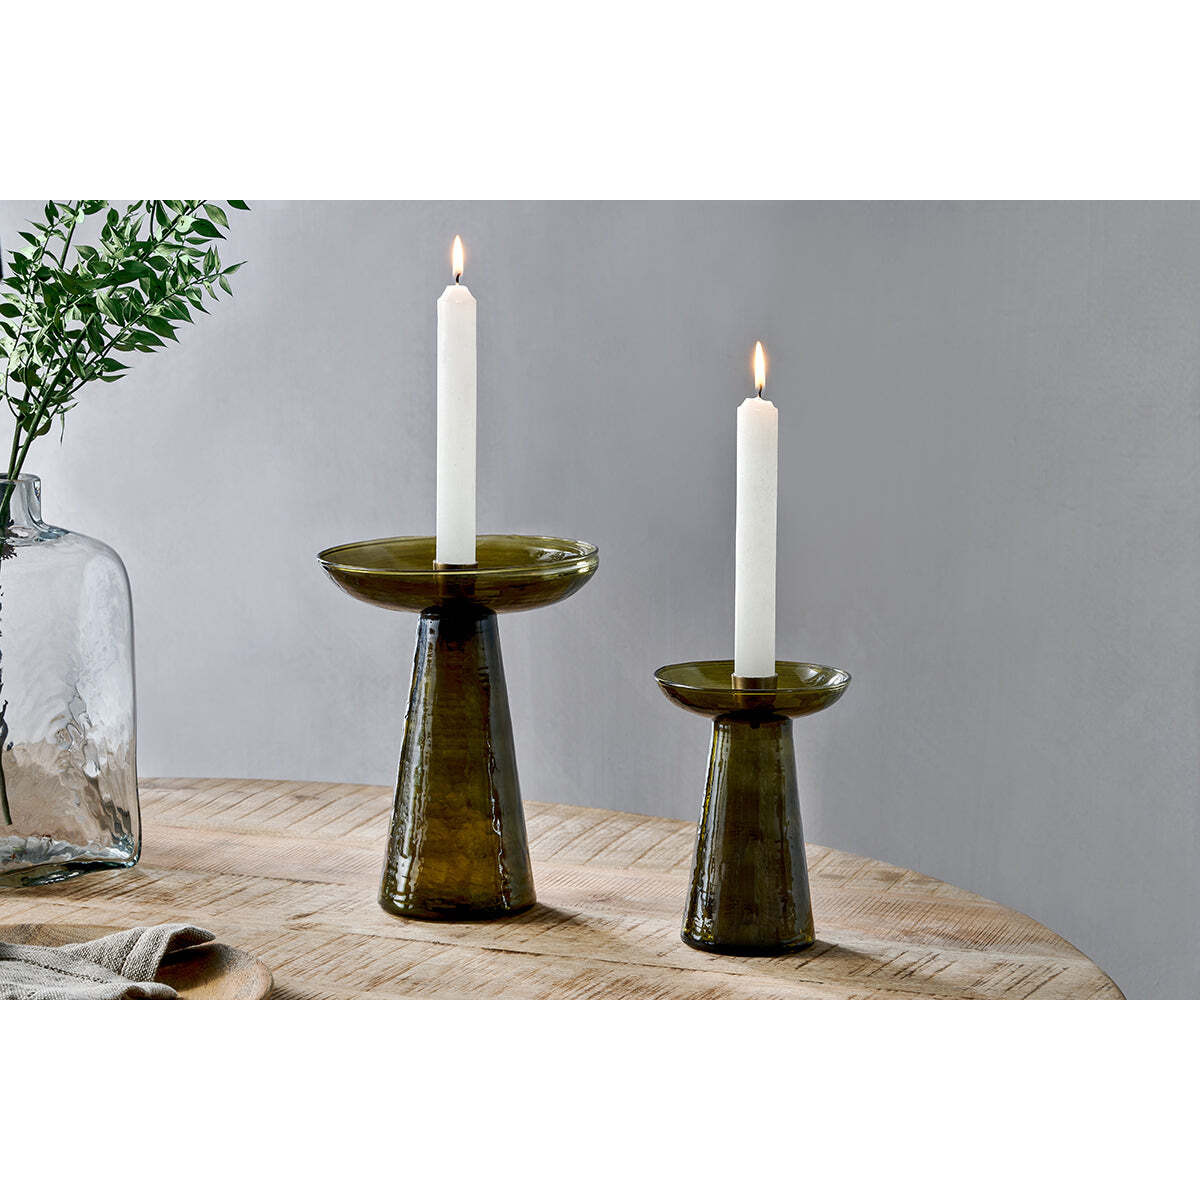 nkuku Avyn Recycled Glass Candle Holder - Candles Holders & Lanterns - Forest Green - Large